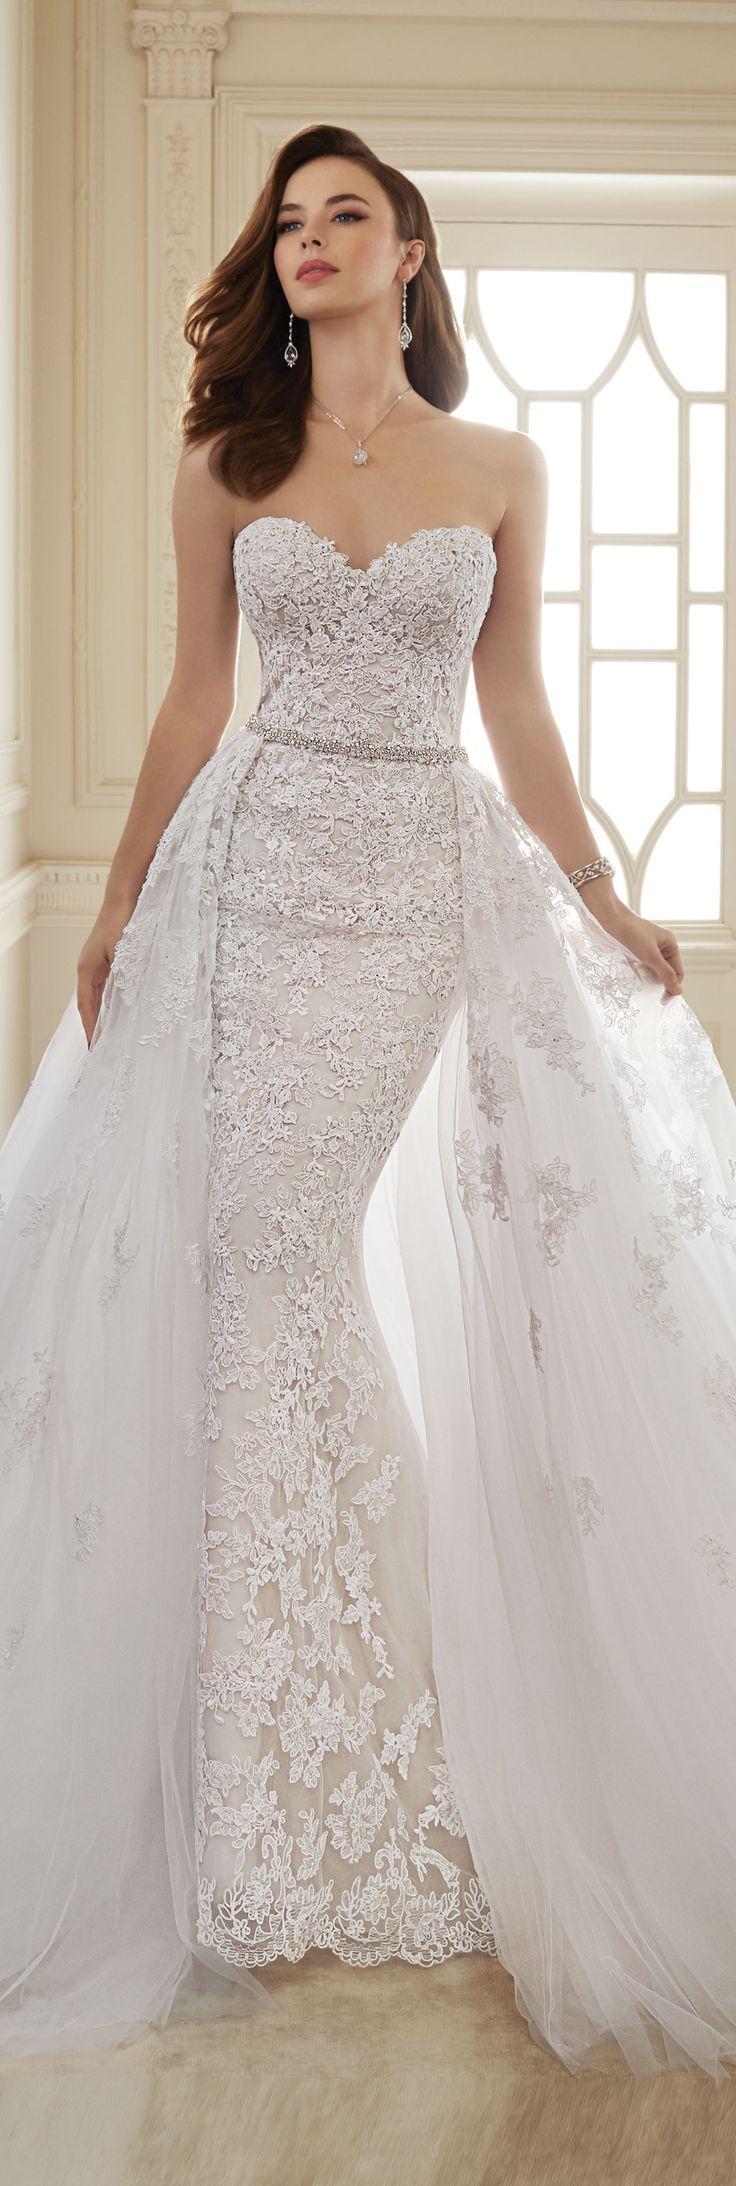 Mariage - Two-Piece Lace & Tulle Wedding Dress - Sophia Tolli Y11652